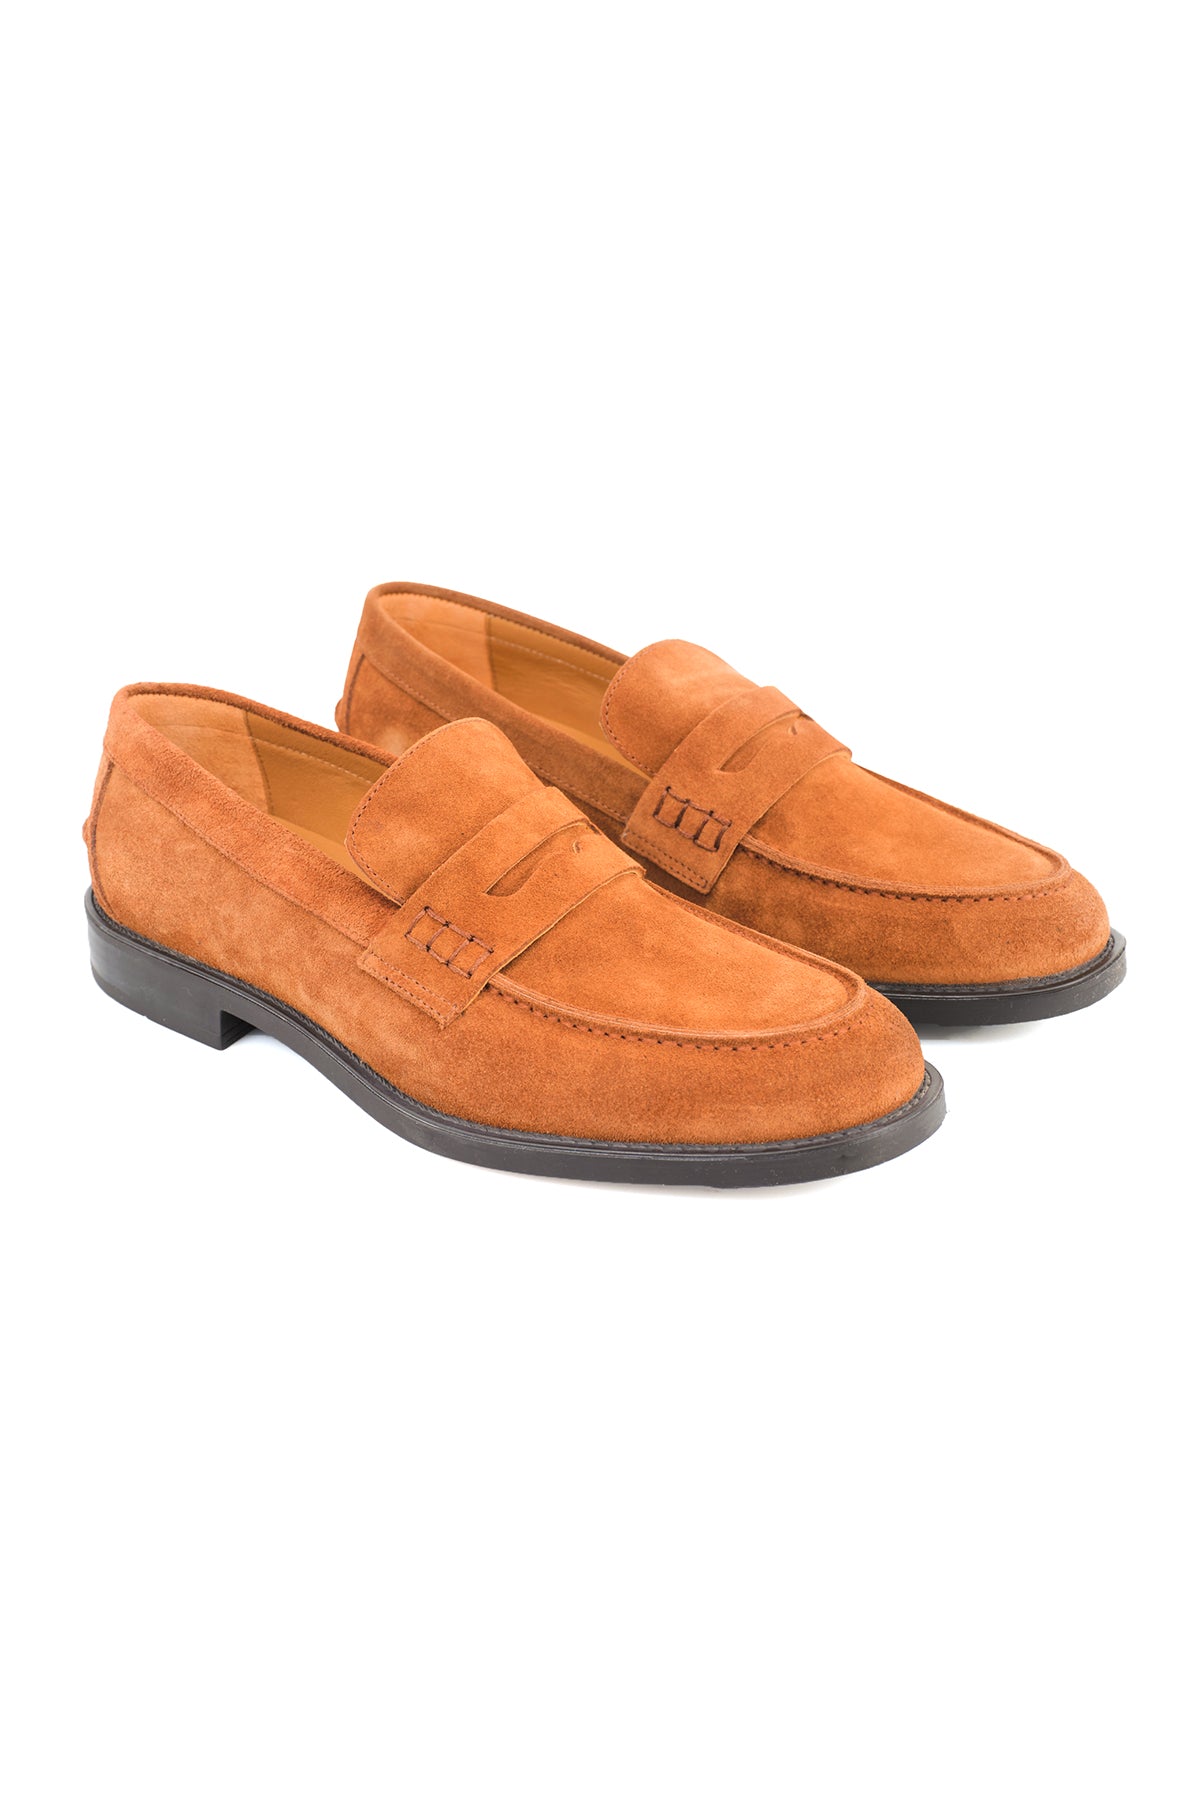 SUEDE PENNY LOAFERS ΤΑΜΠΑ.